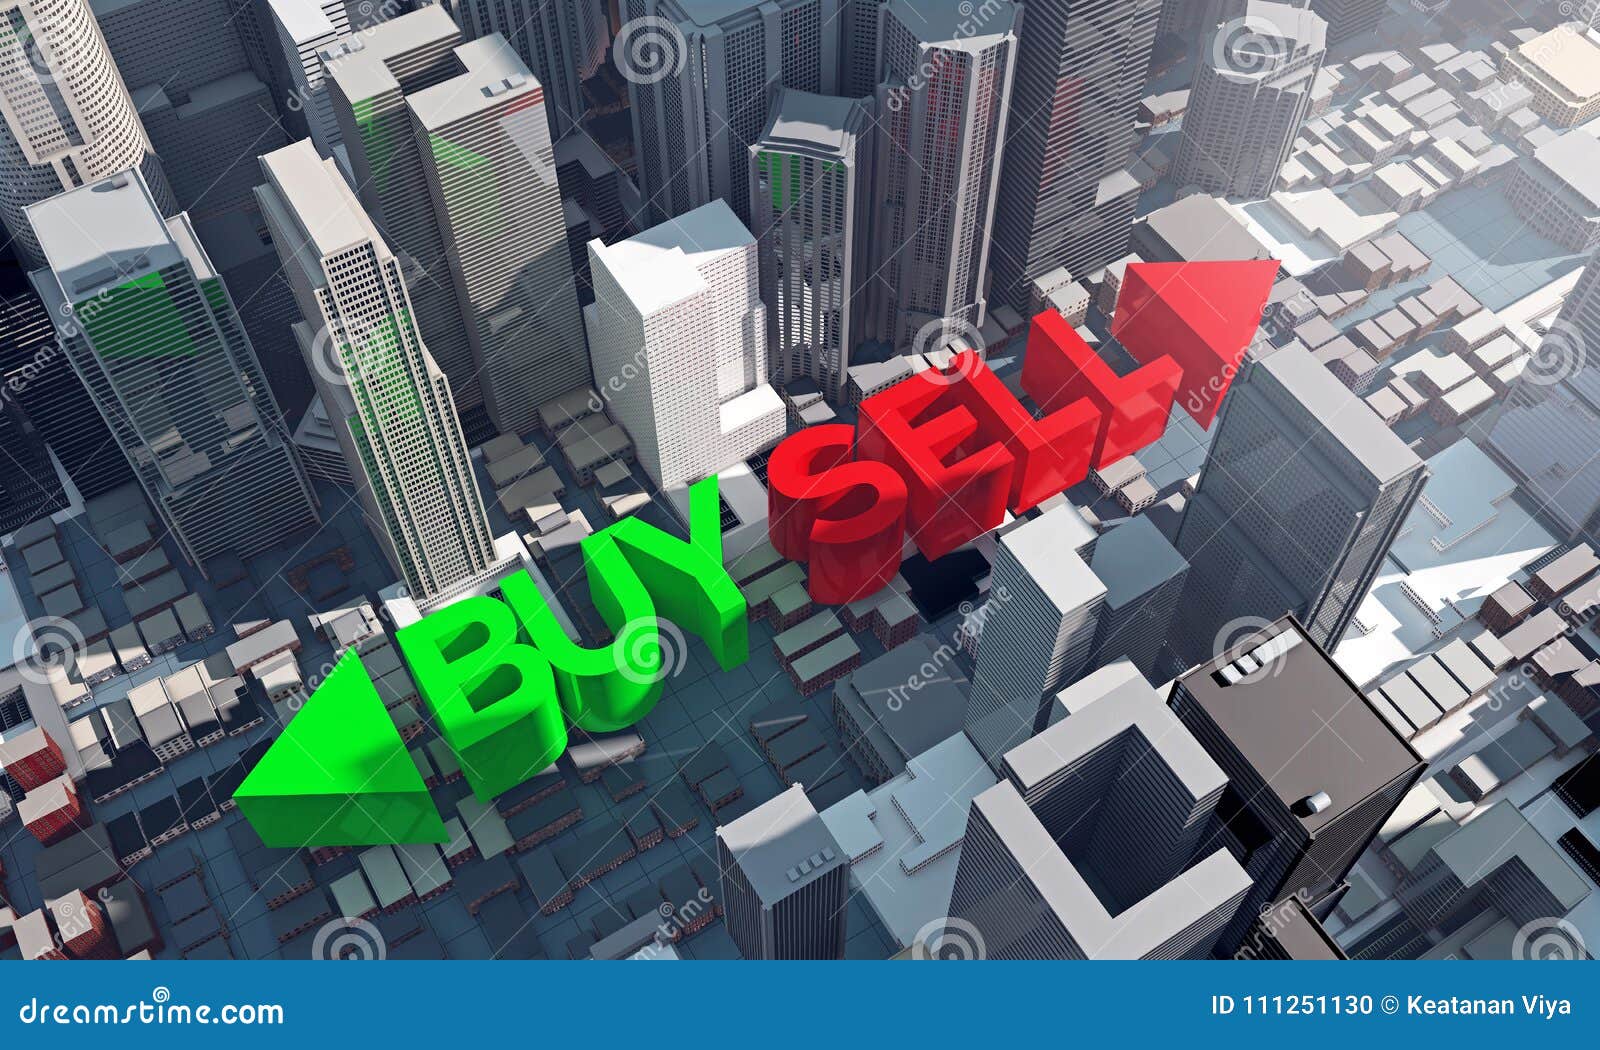 Buy or sell an Asset: https://www.dreamstime.com